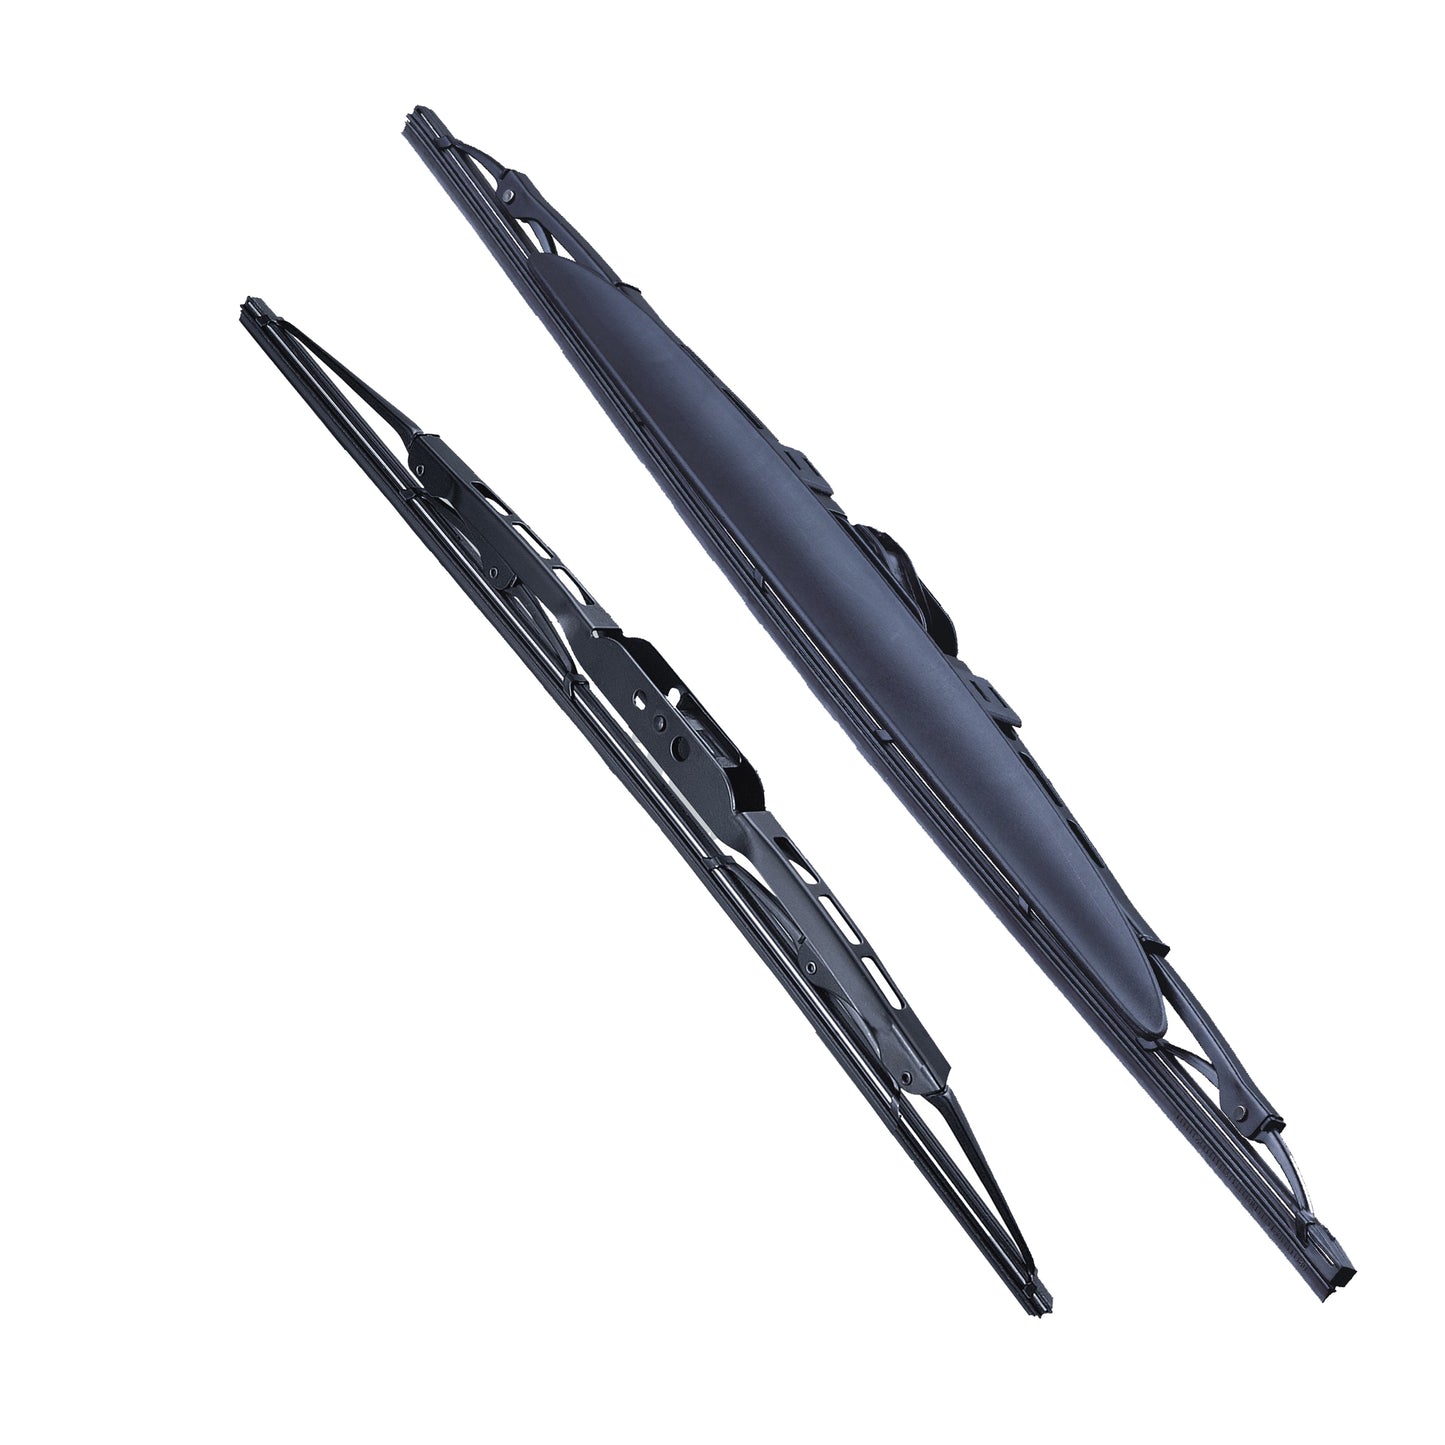 JEEP COMPASS SUV Sep 2006 to Feb 2017 Wiper Blade Kit